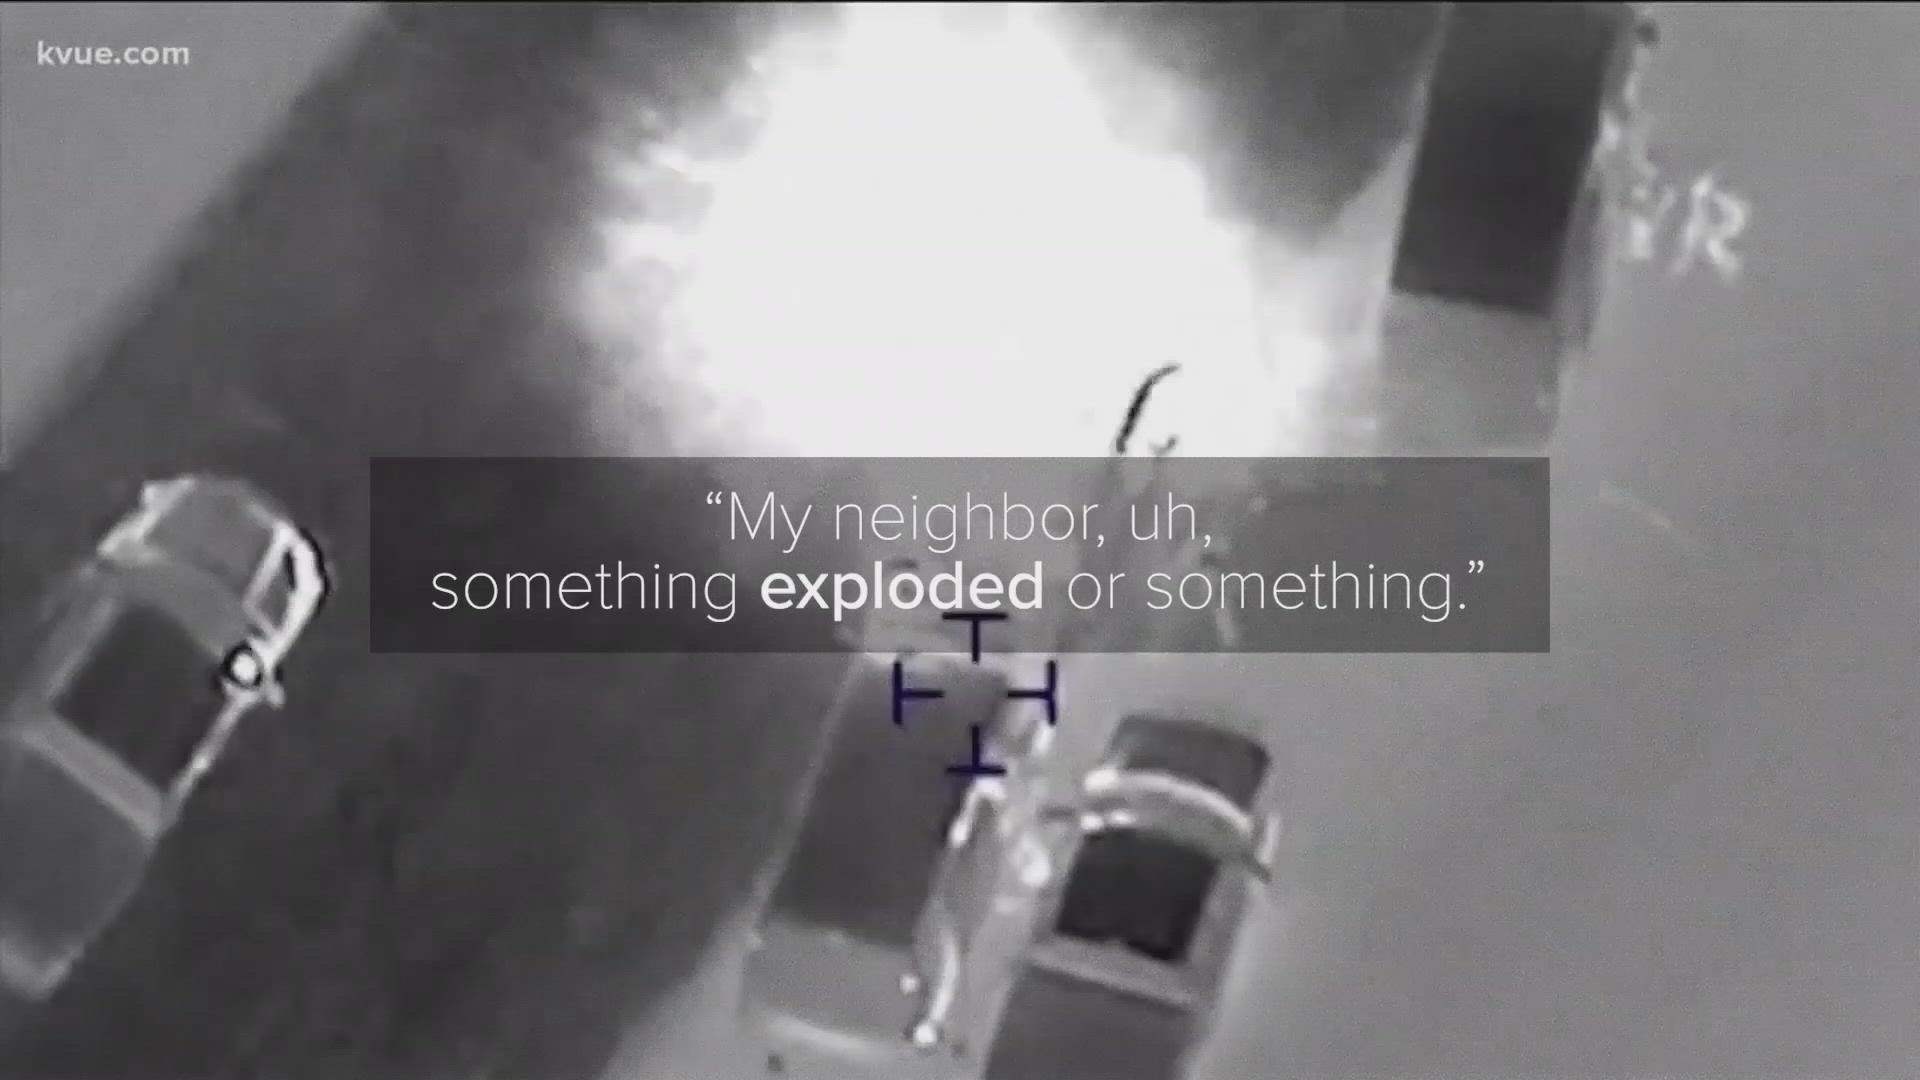 On March 2, 2018, a serial bomber planted his first explosive, killing a man in North Austin. KVUE looks back into how the investigation unfolded.